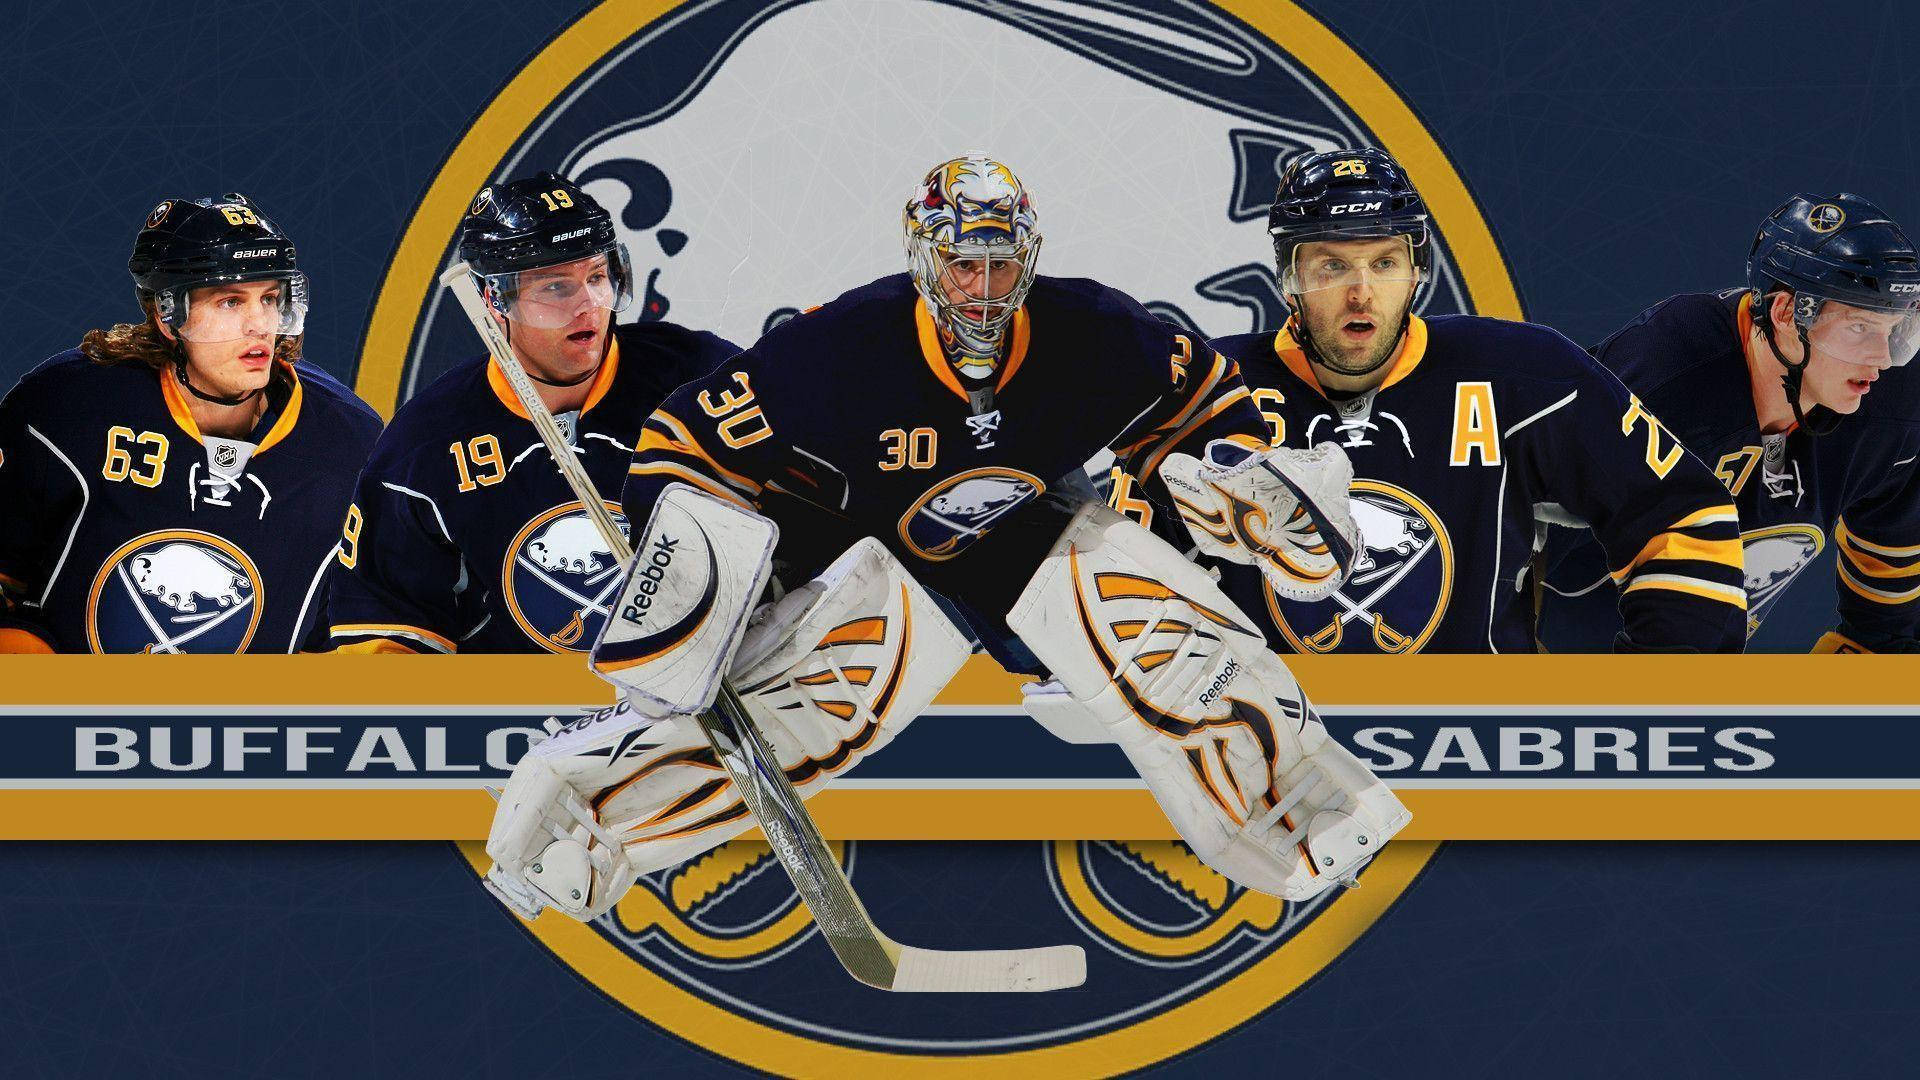 Buffalo Sabres Players In Action